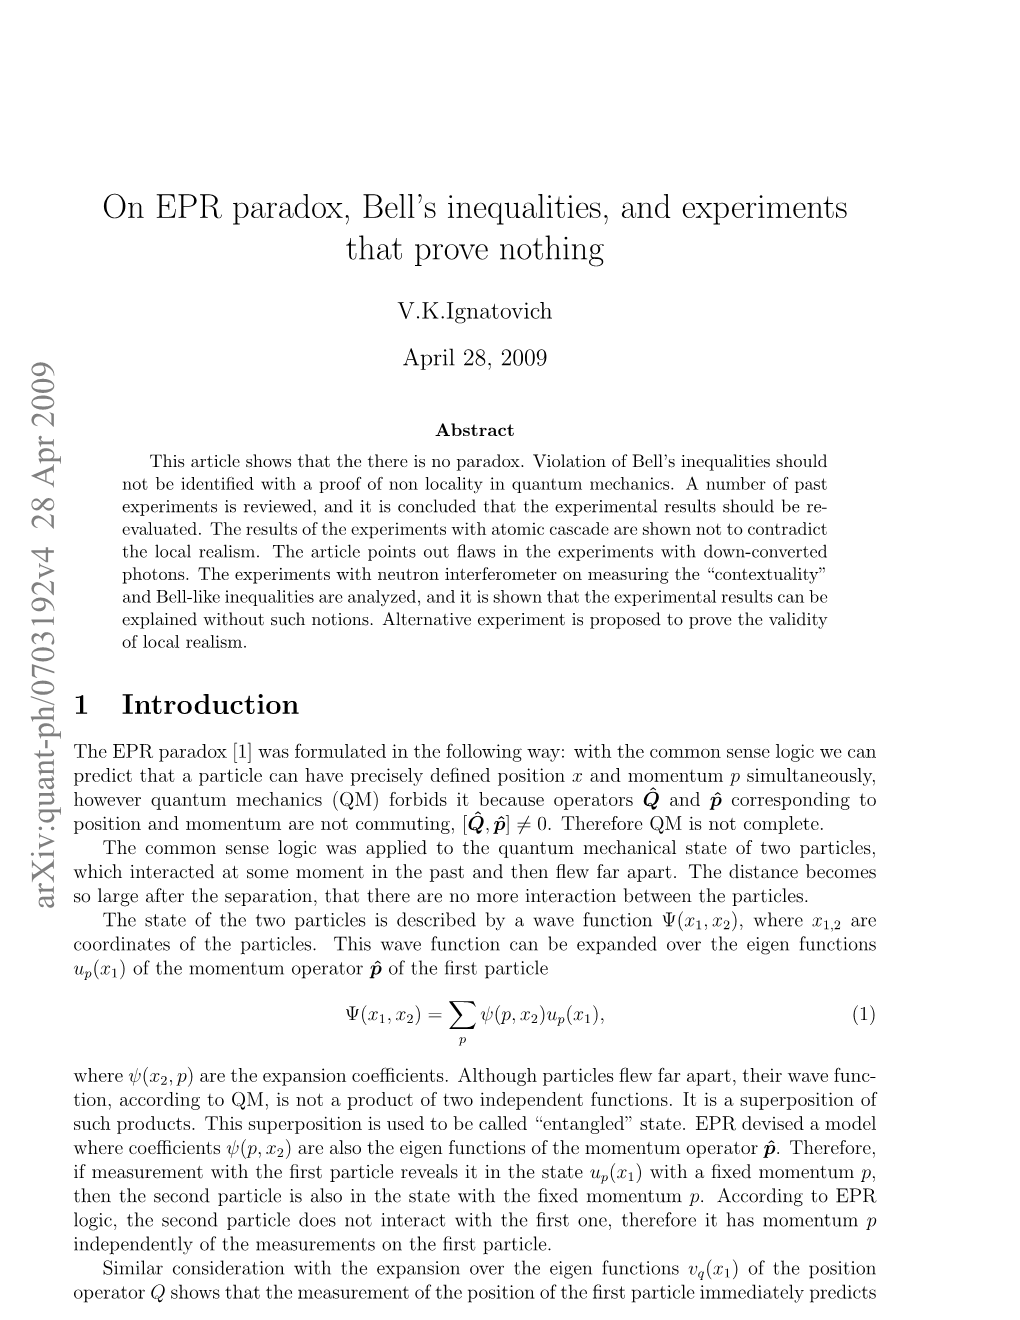 On EPR Paradox, Bell's Inequalities, and Experiments That Prove